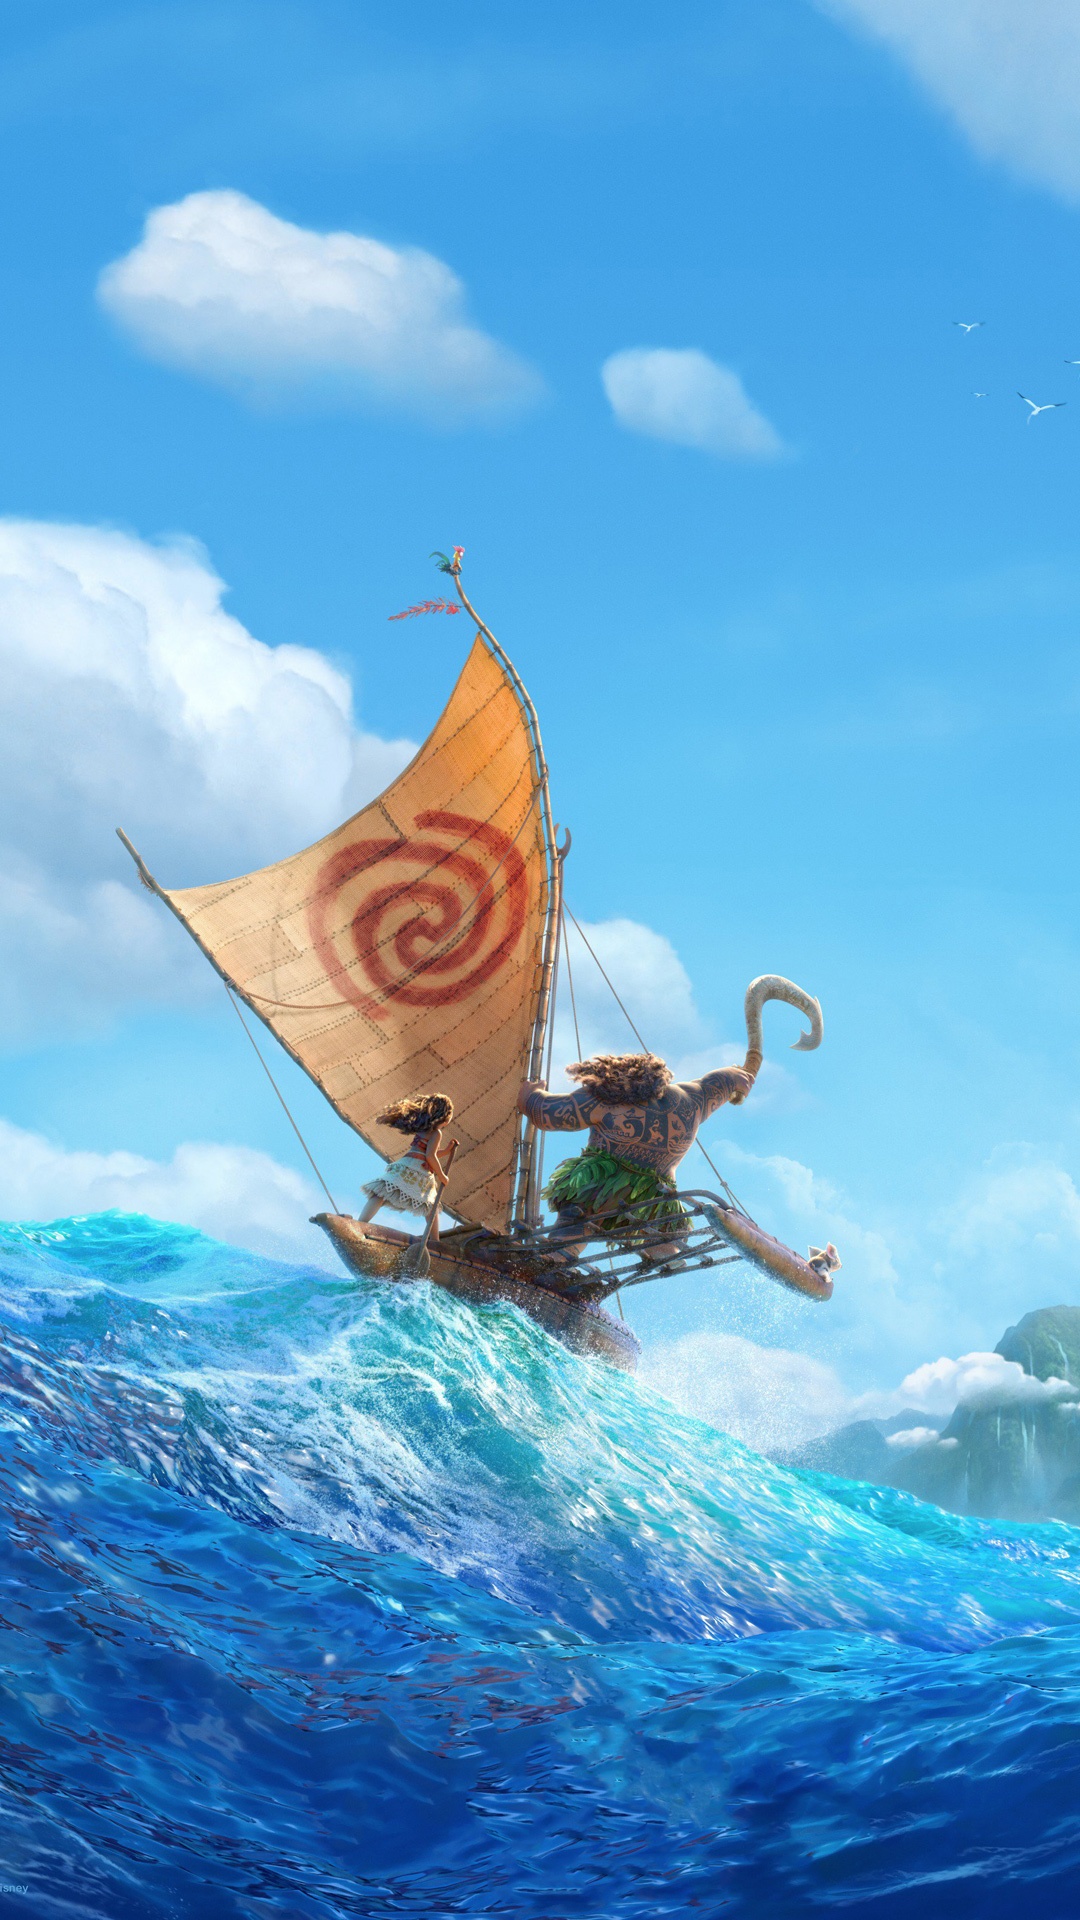 Disney Moana 2016 Animation Wallpapers in jpg format for ...